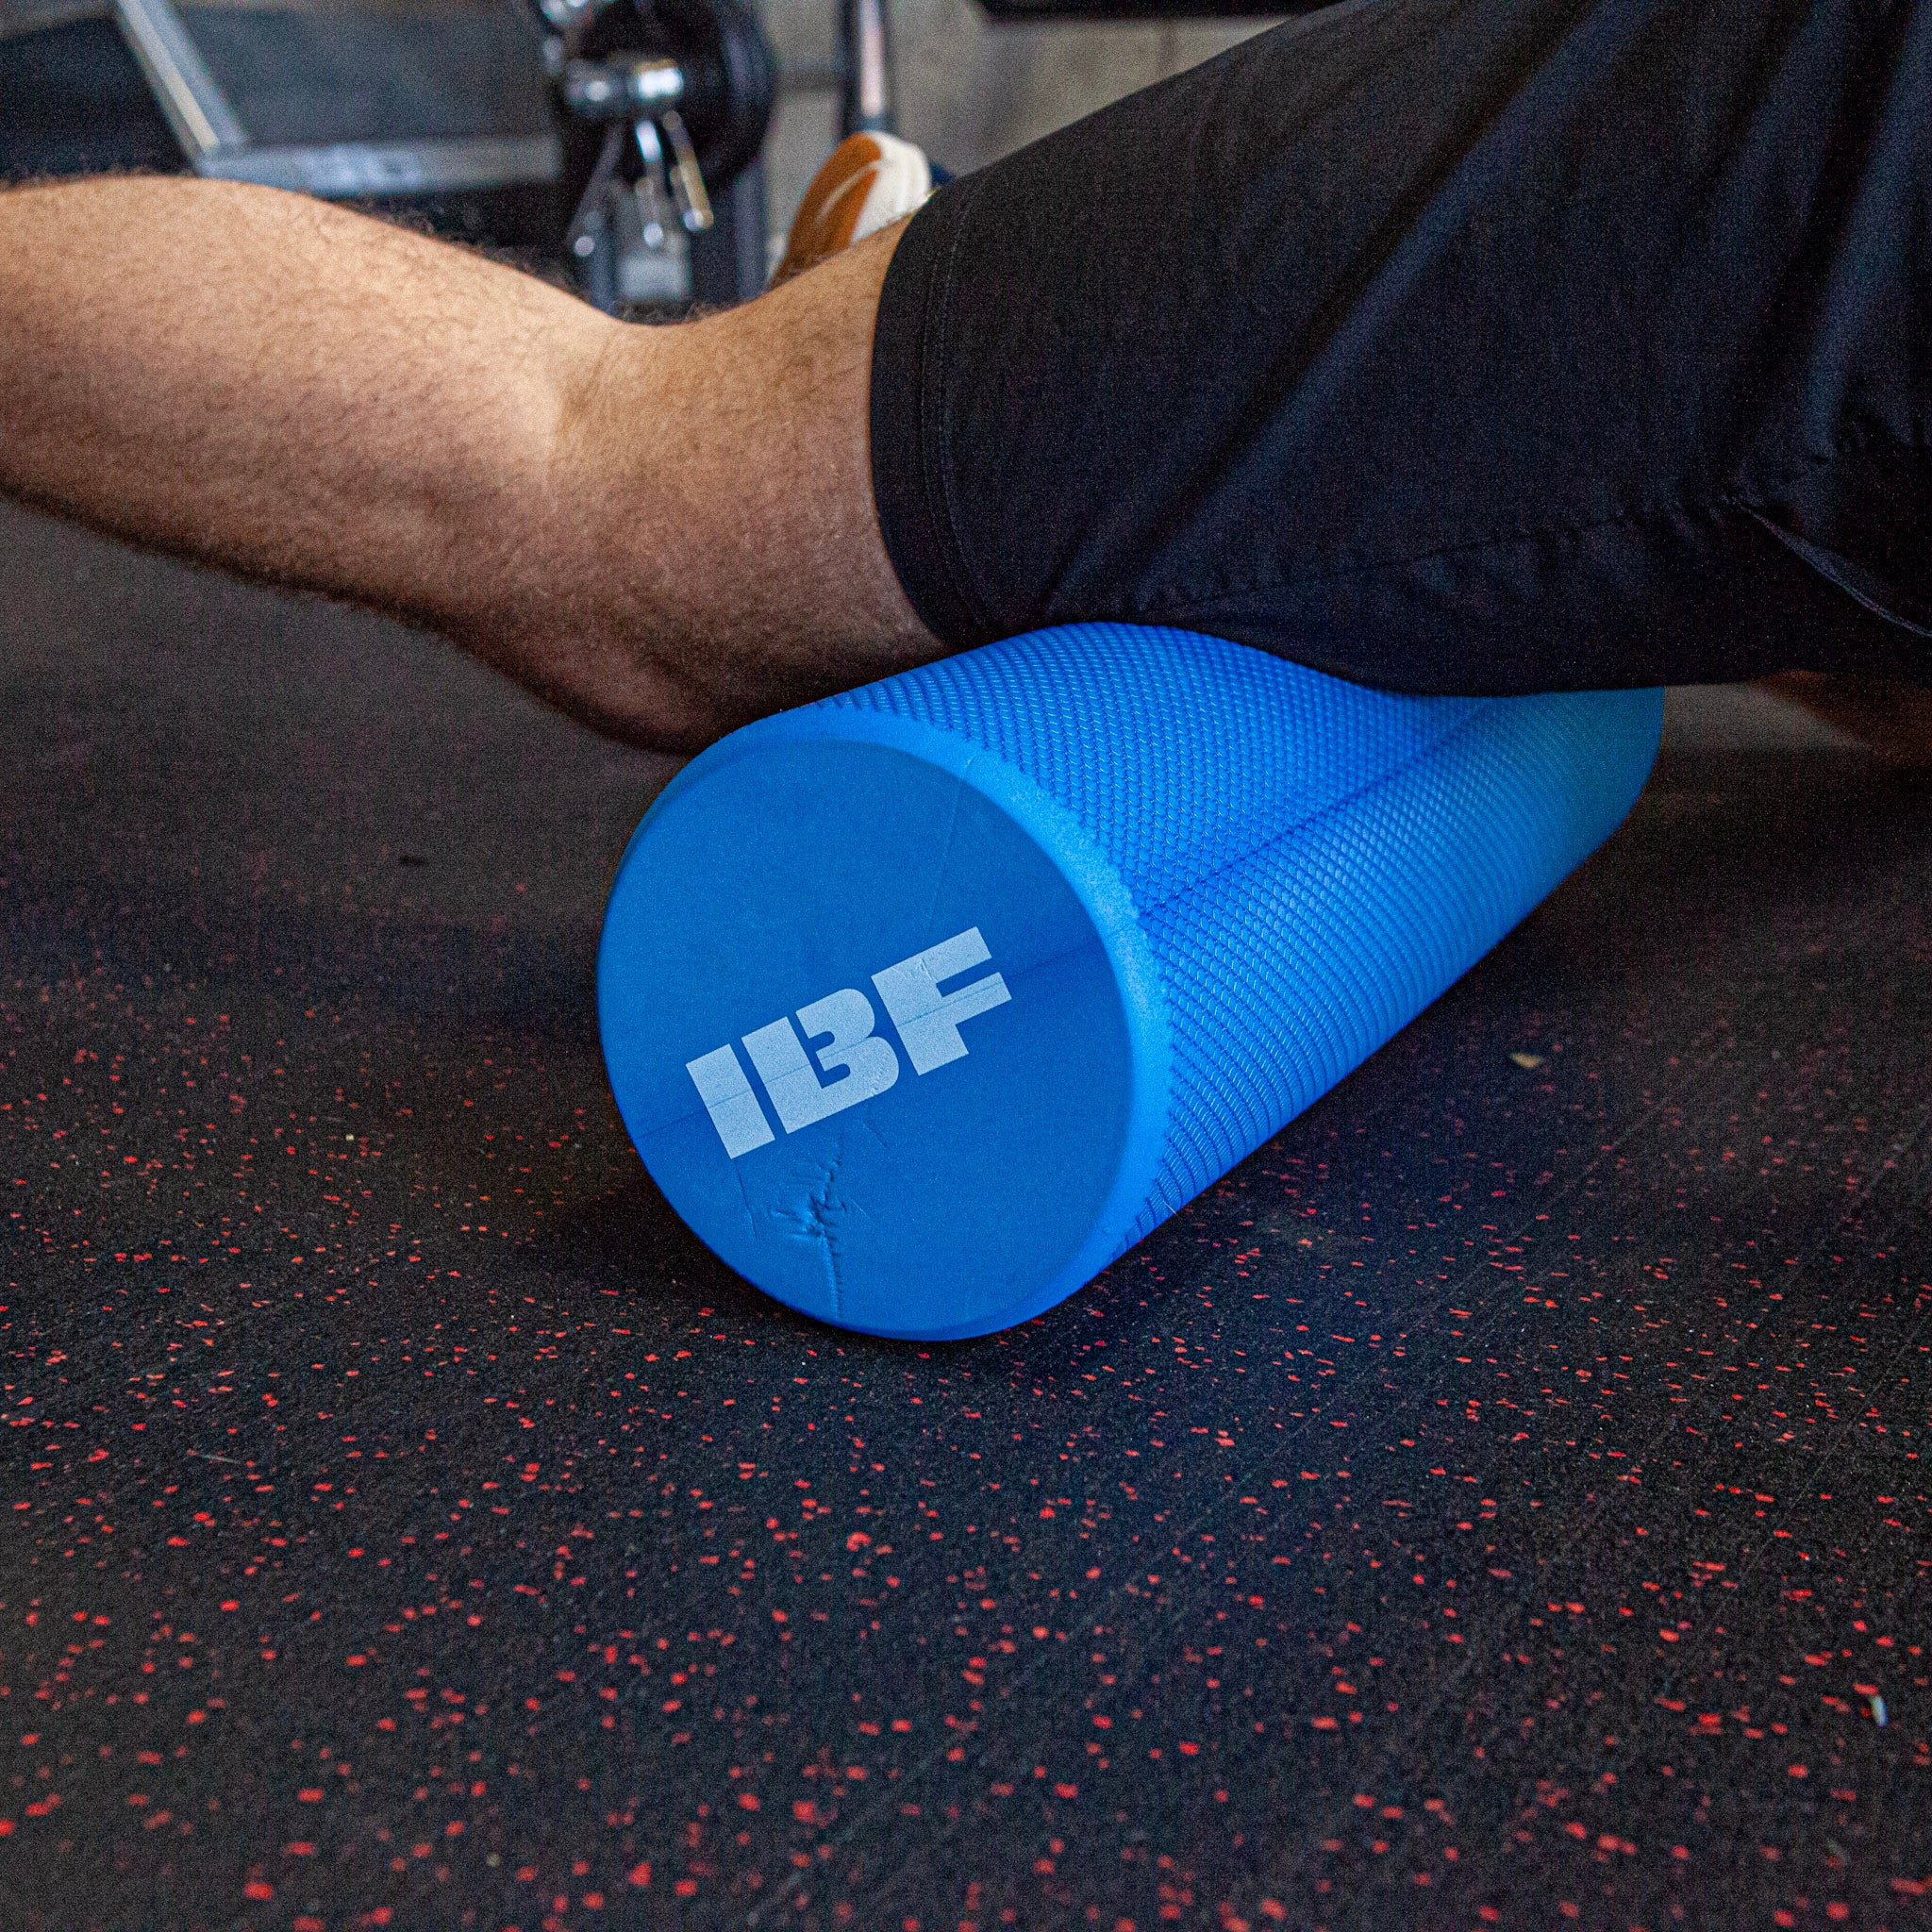 IBF High-Density Deluxe Foam Roller, Available in 18” & 36”